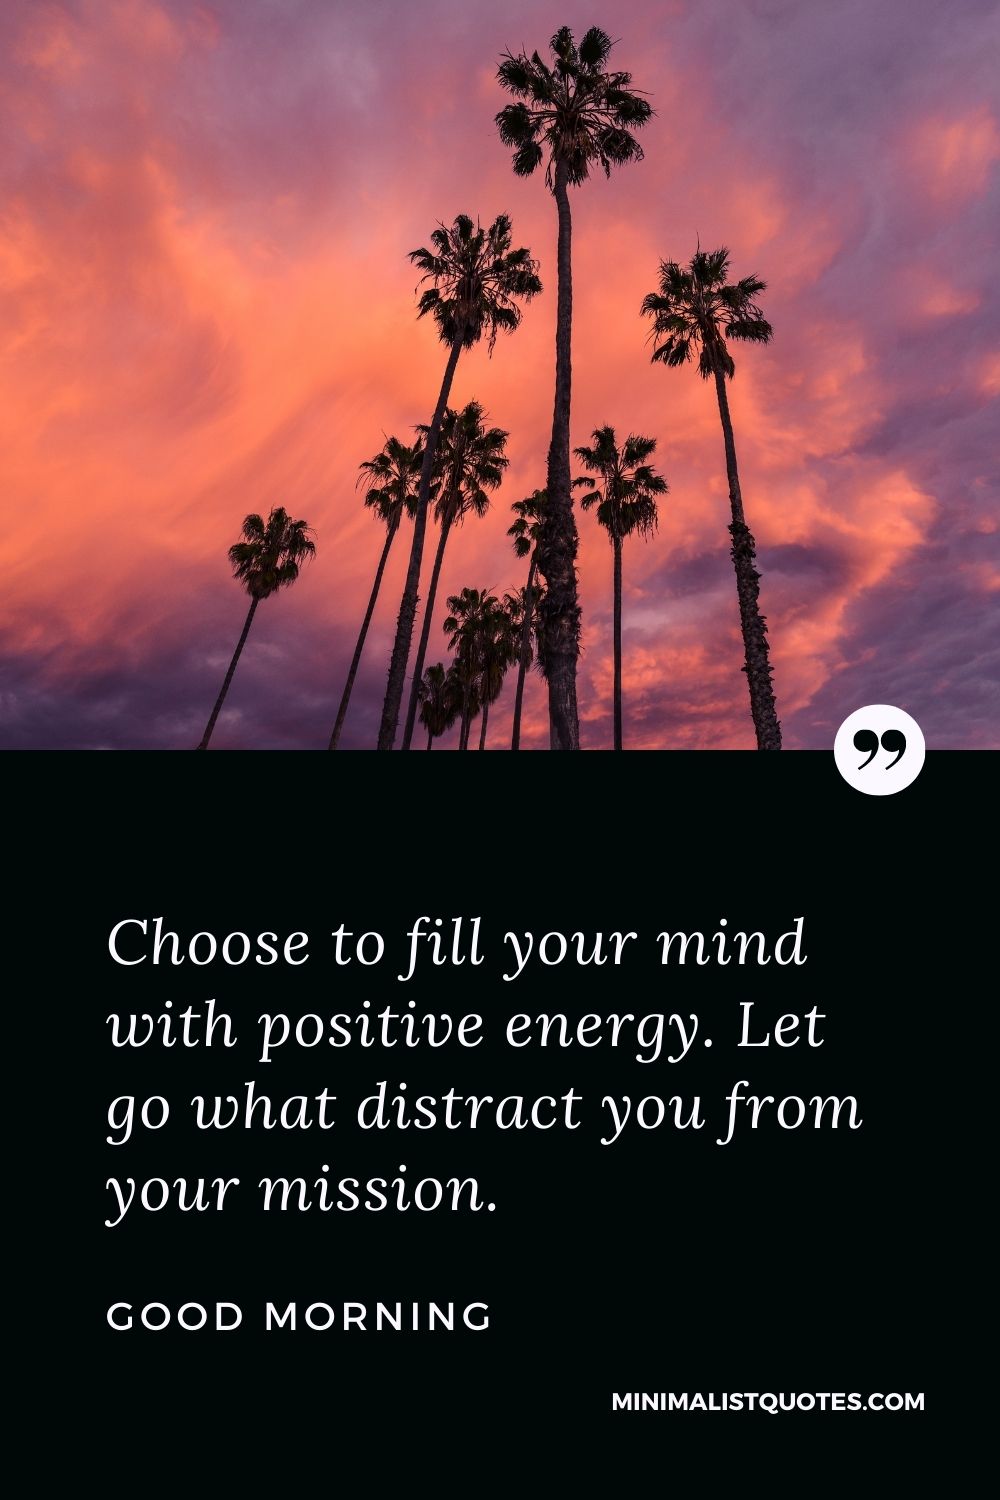 Good Morning Wish & Message With Image: Choose to fill your mind with positive energy. Let go what distract you from your mission.